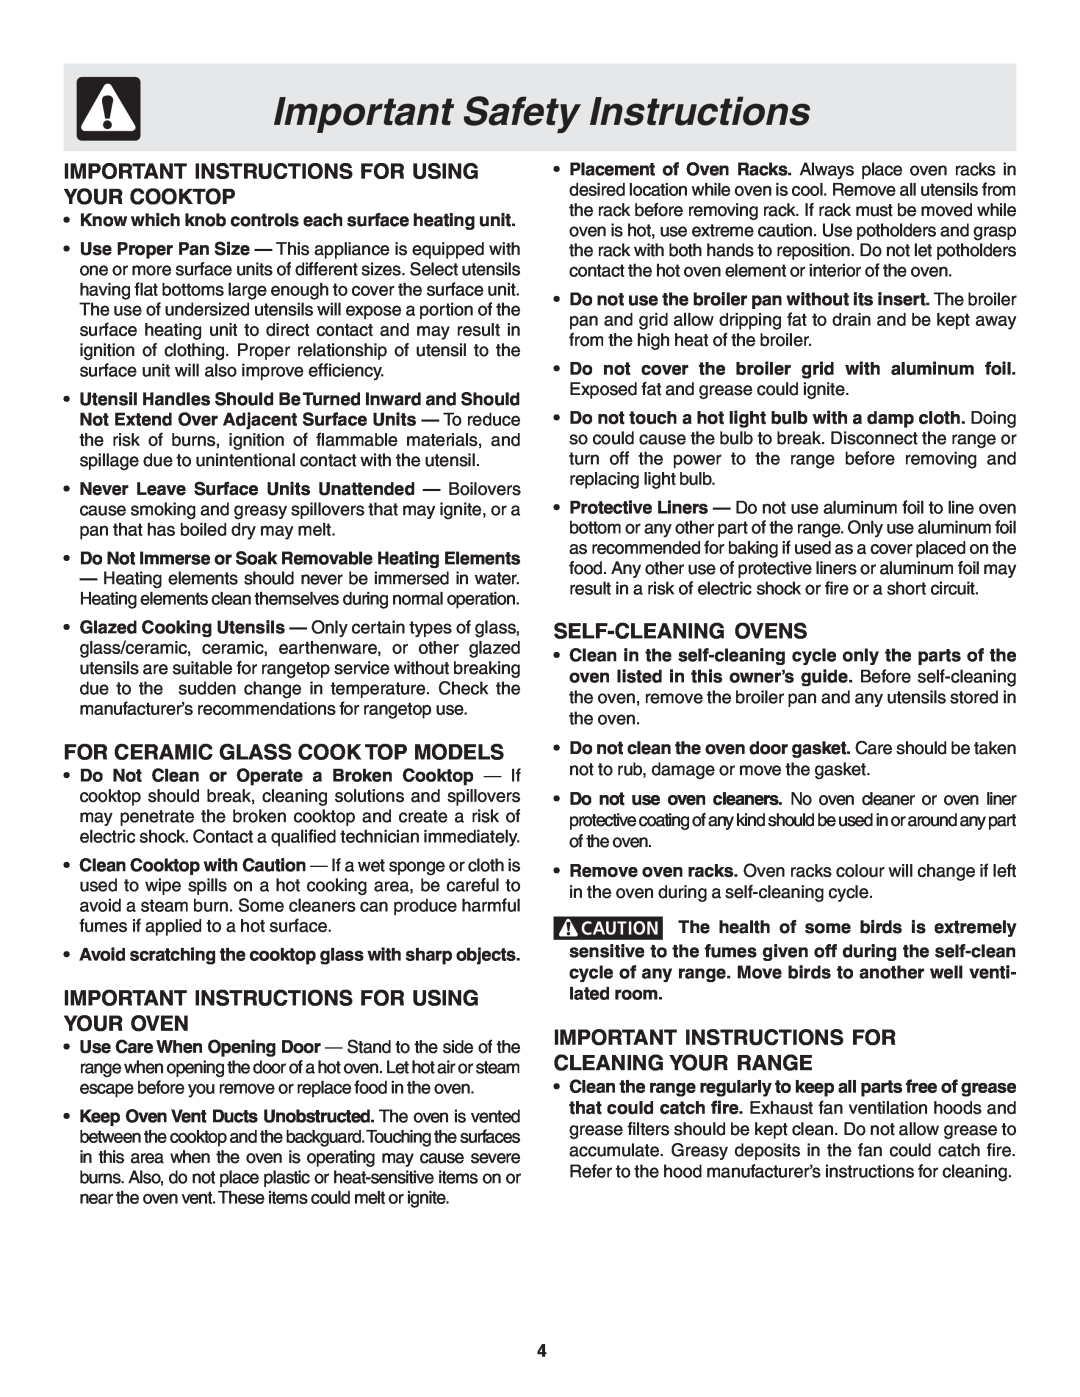 Frigidaire 318200439 Important Safety Instructions, Important Instructions For Using Your Cooktop, Self-Cleaning Ovens 